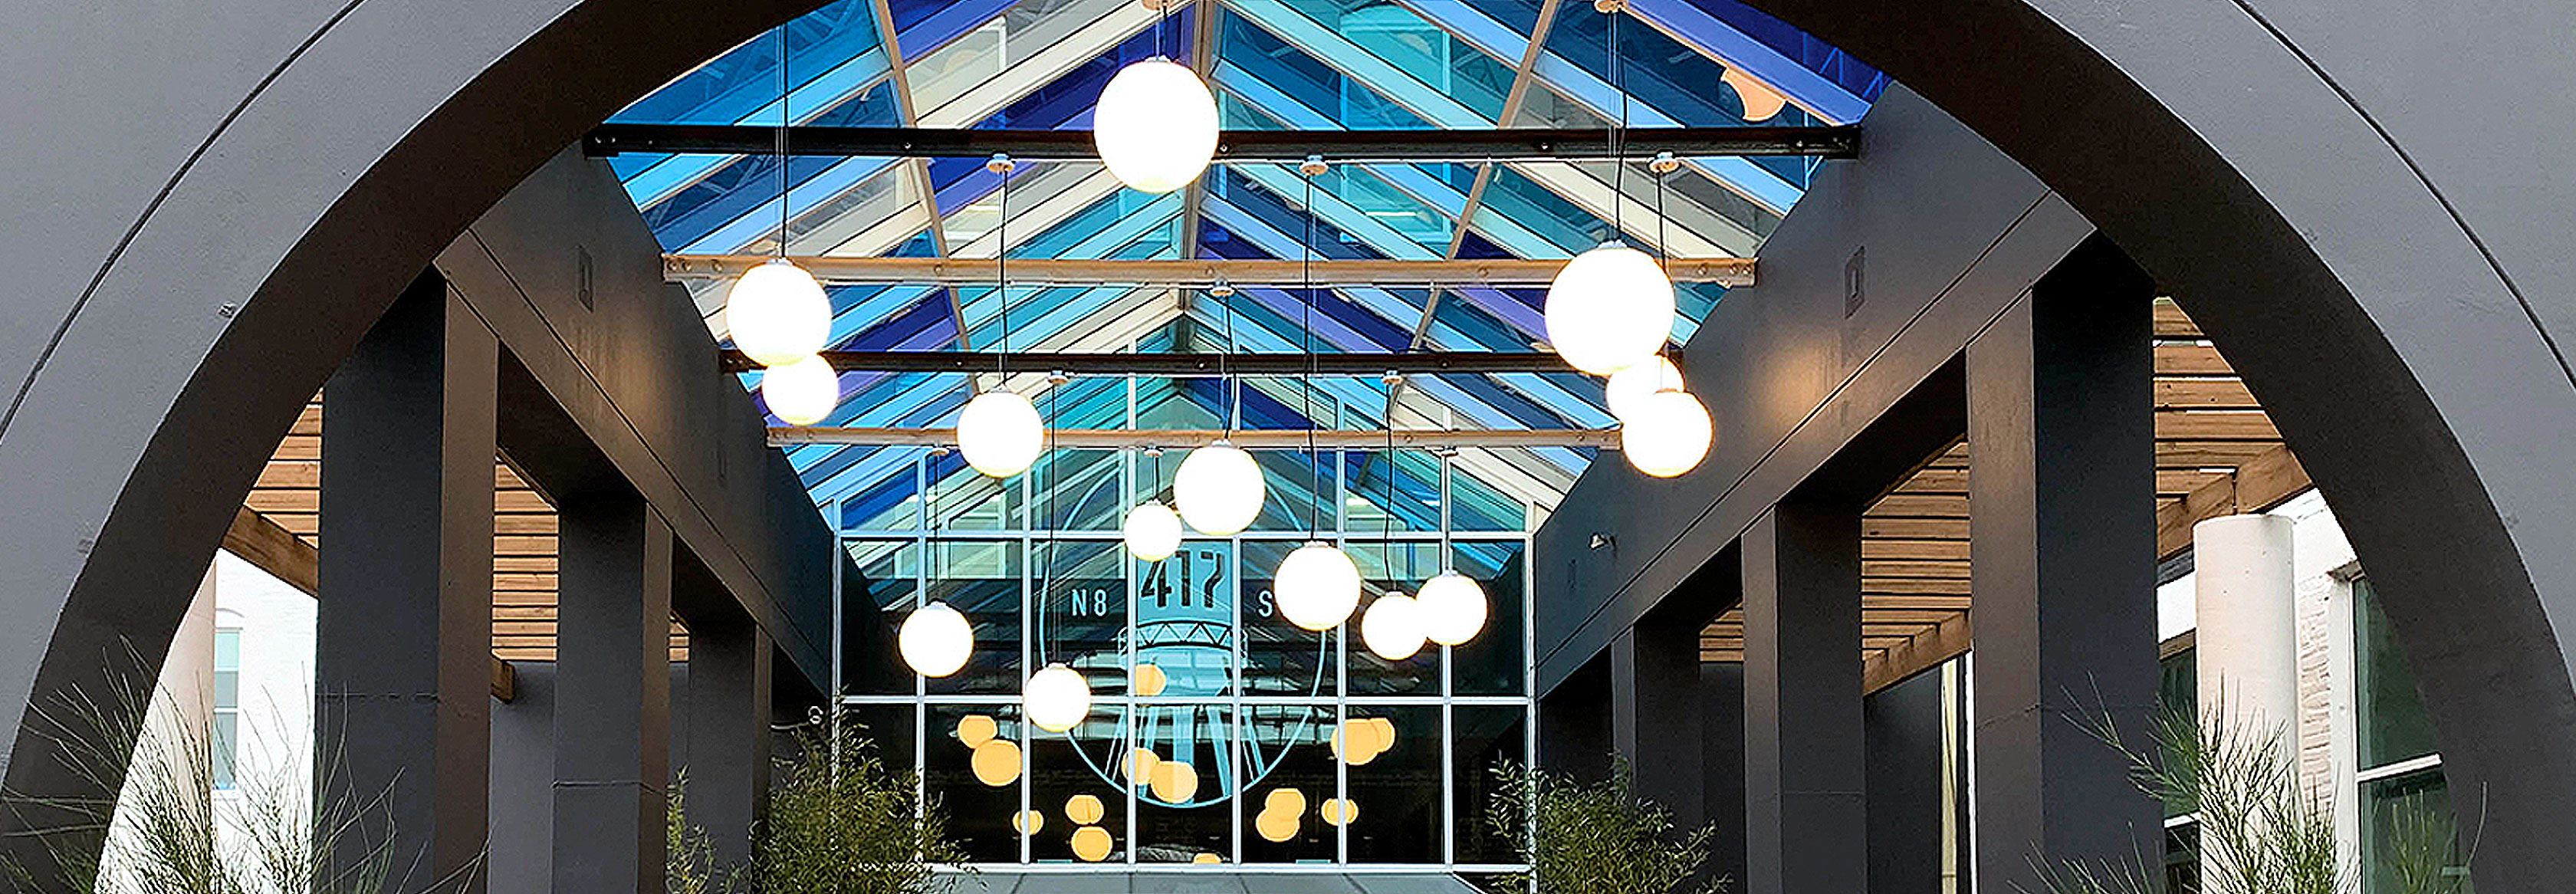 Zume Out globe pendant lights mounted in atrium entryway